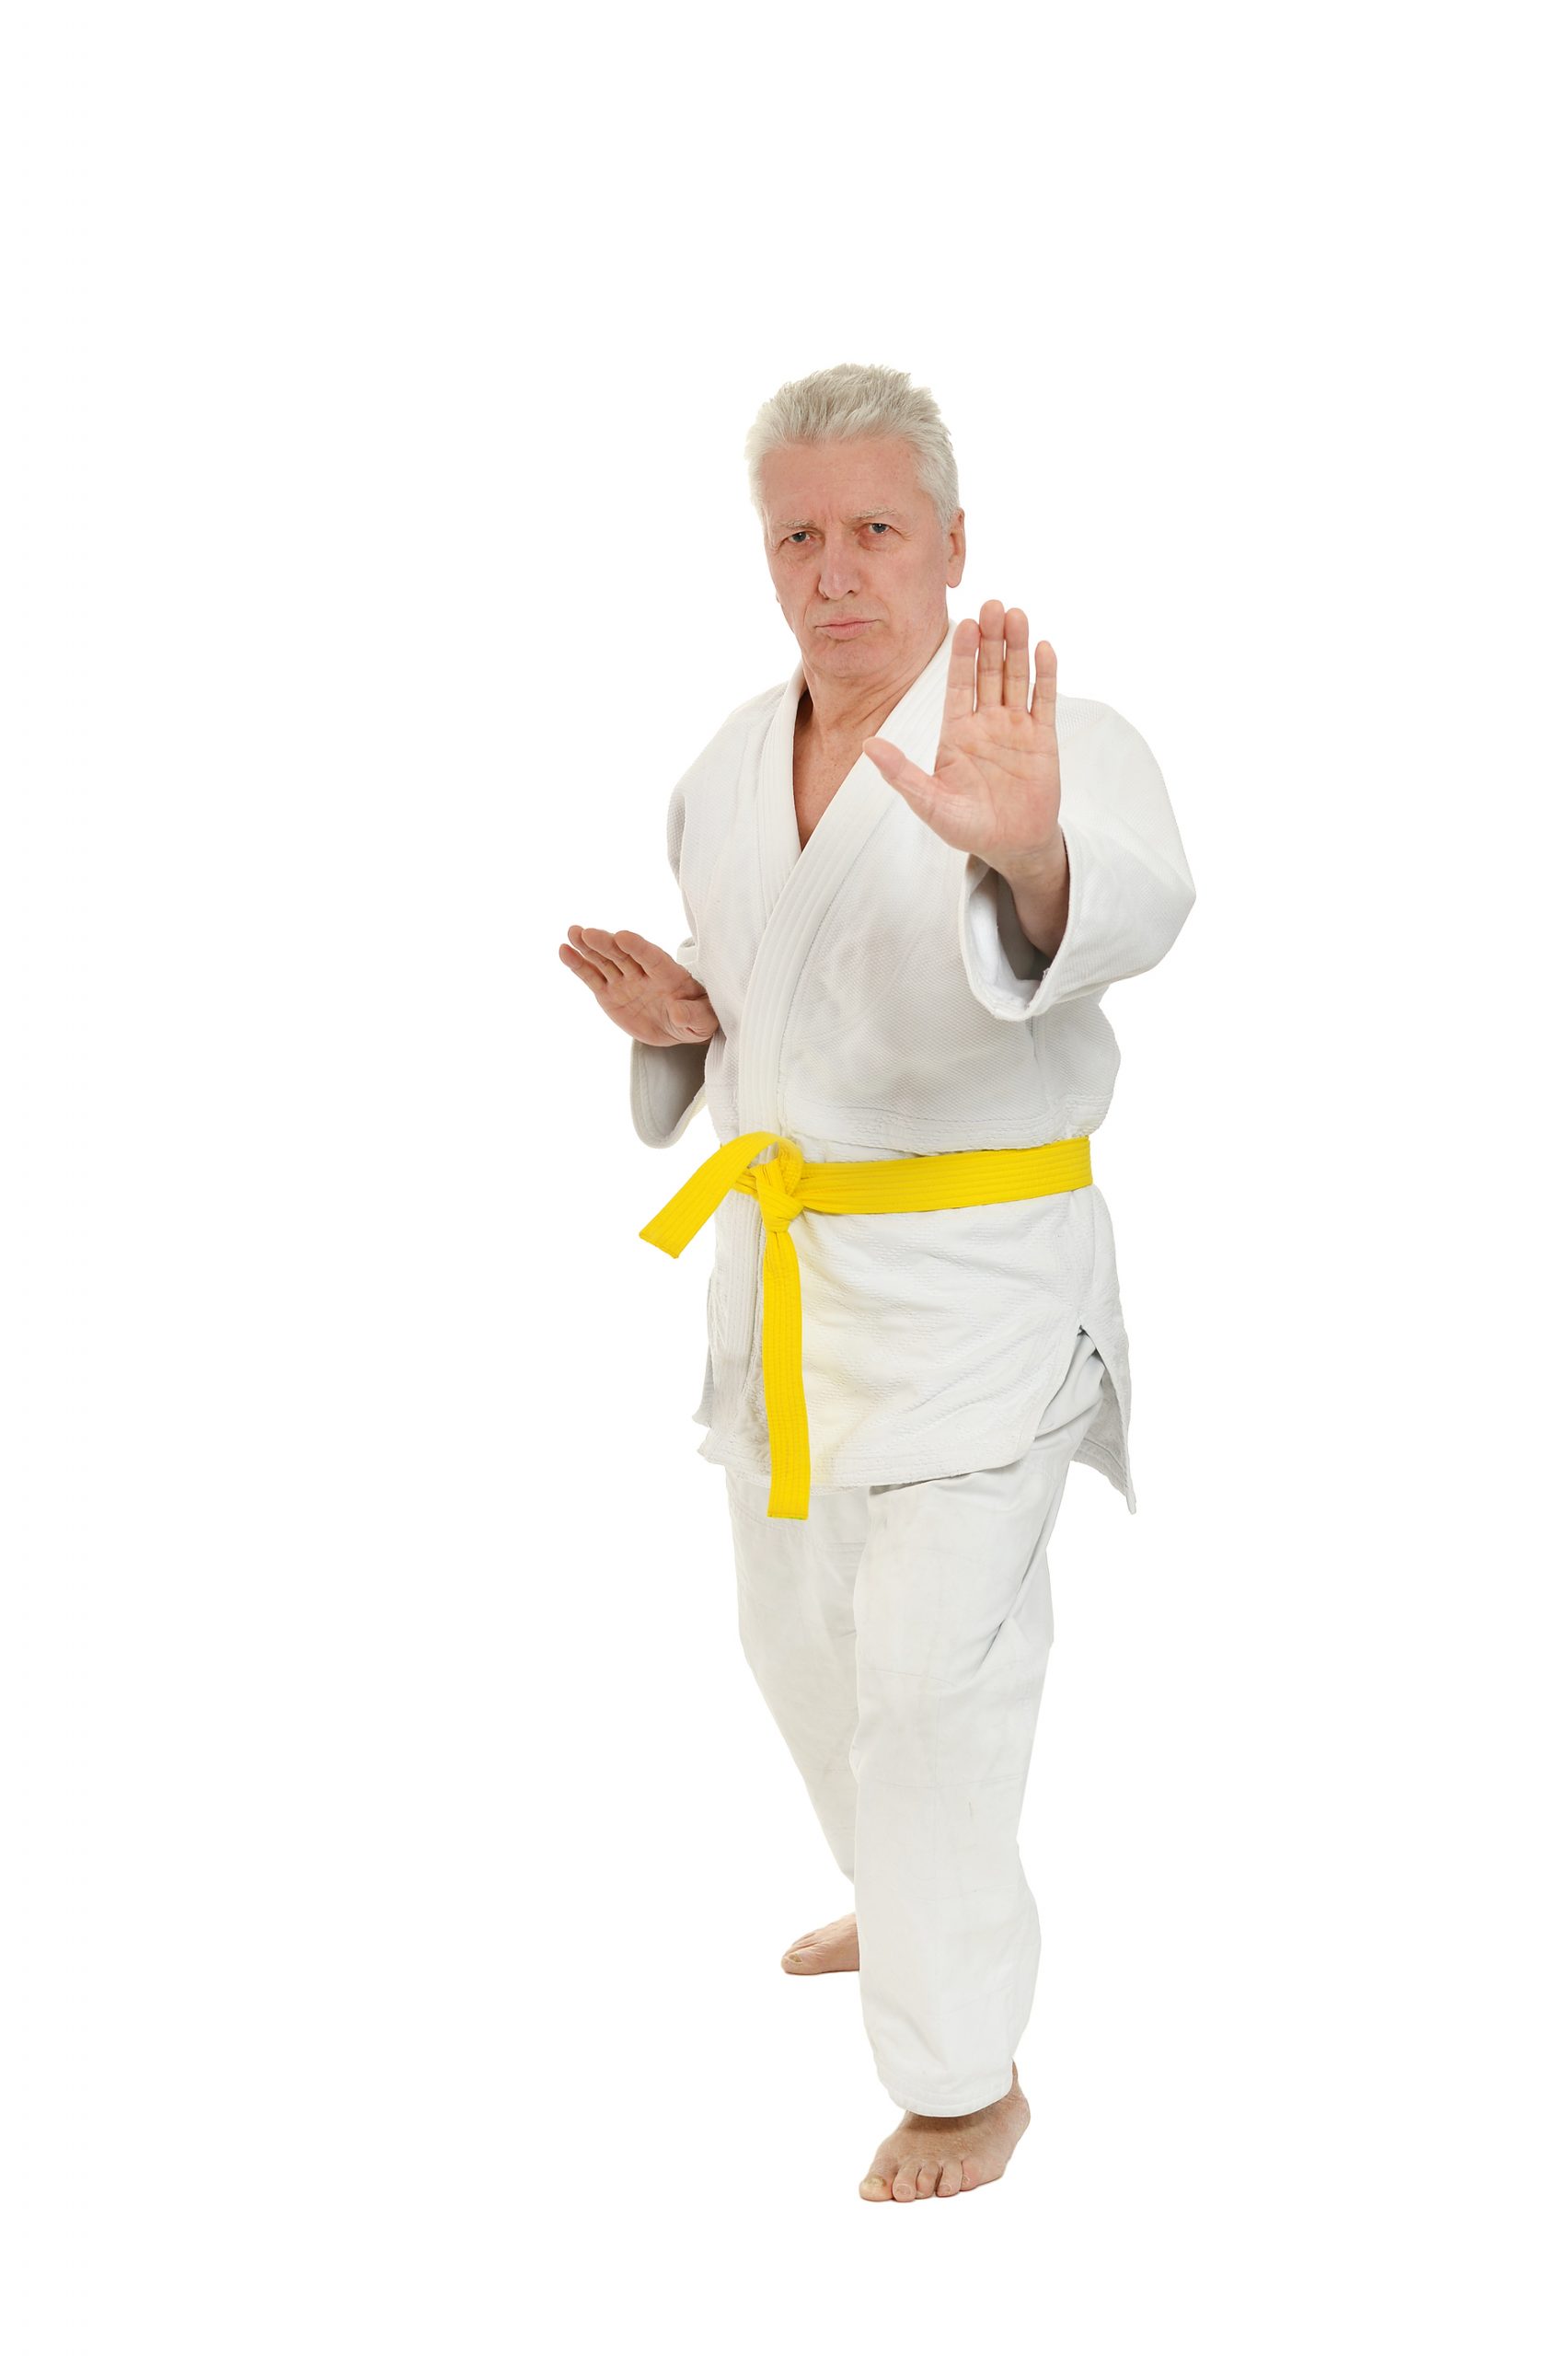 10 karate lessons you can apply to your professional life